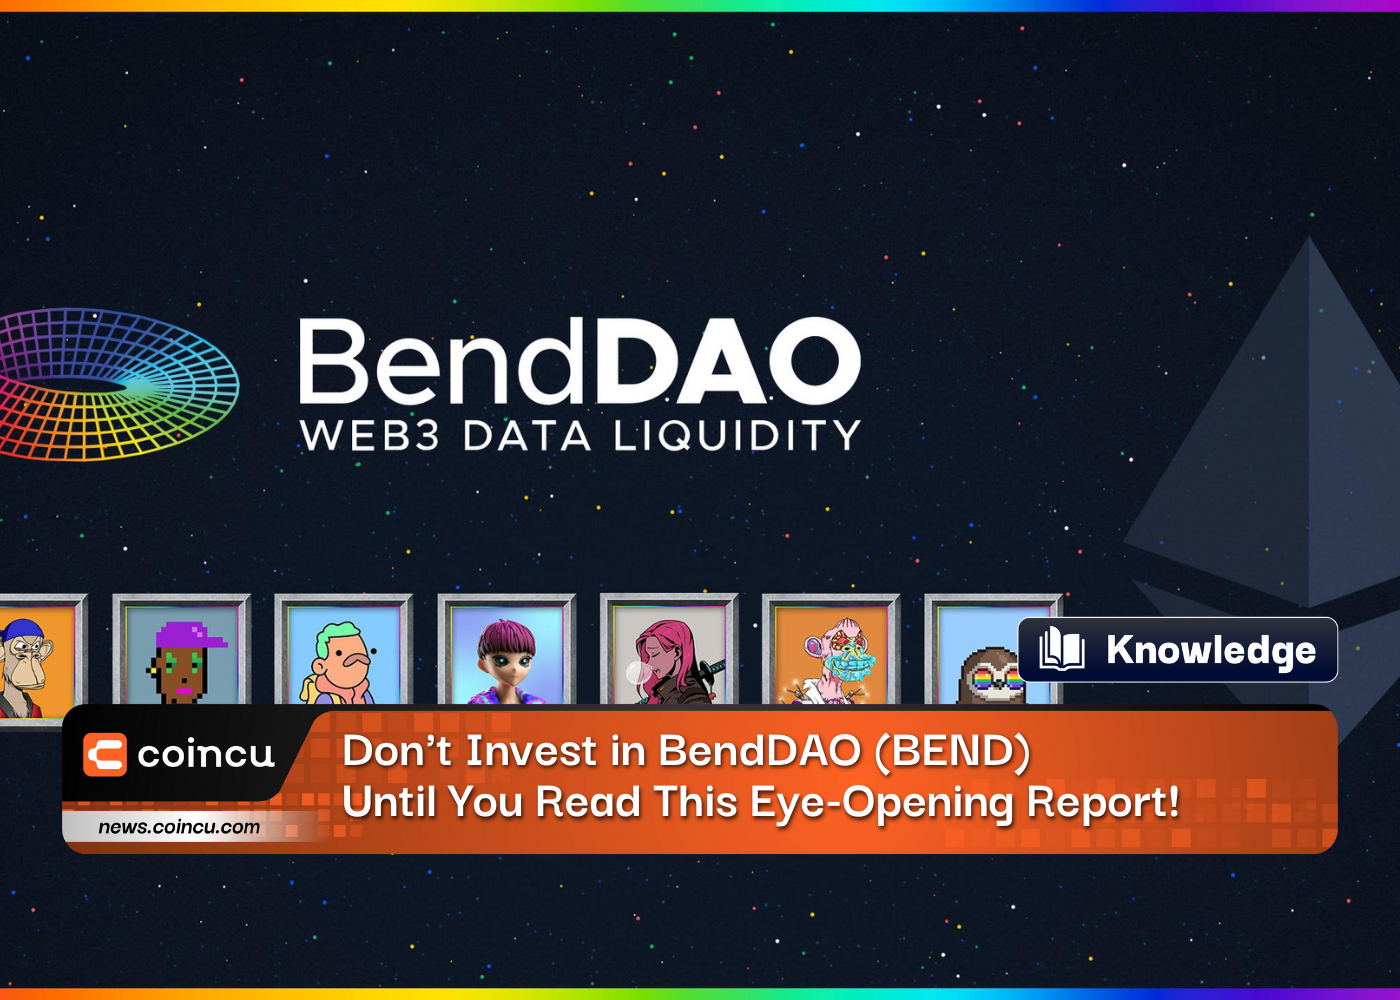 Don’t Invest in BendDAO (BEND) Until You Read This Eye-Opening Report!